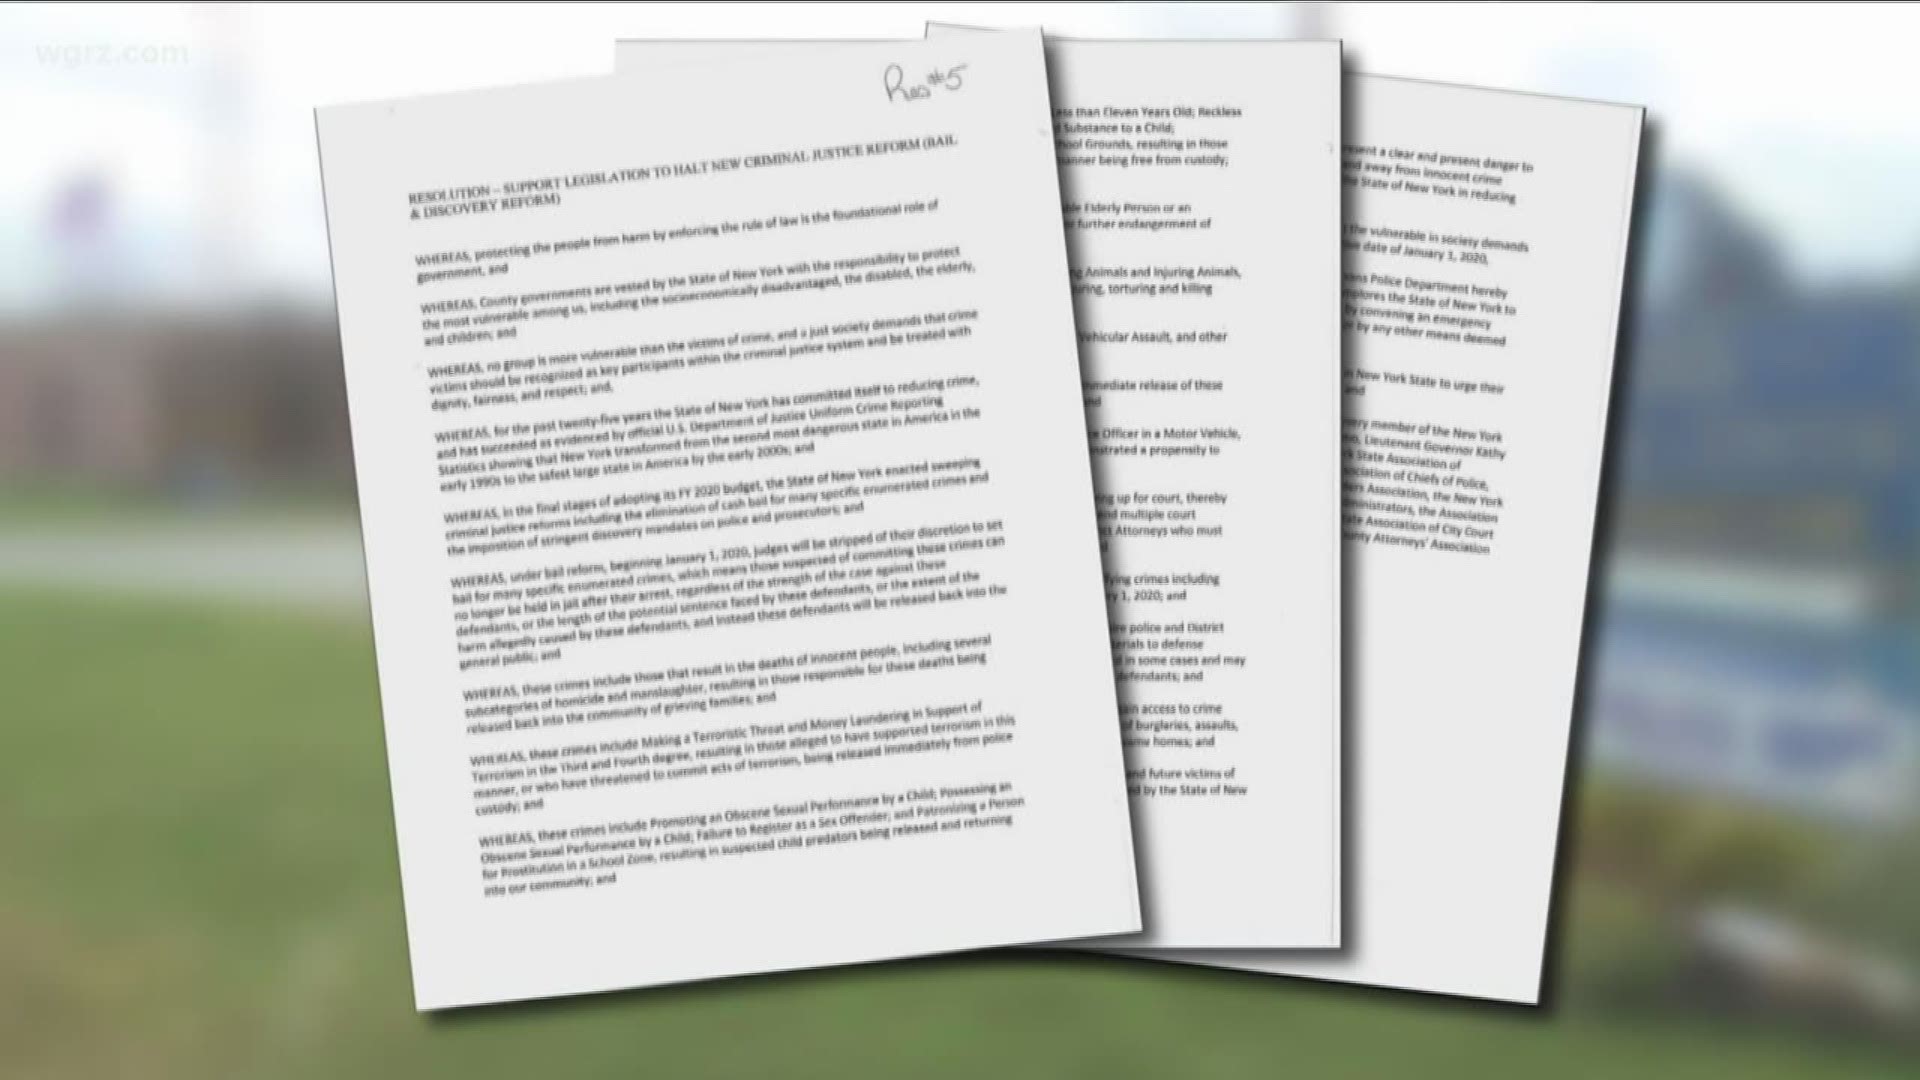 The Town of Evans passed this 3 page resolution showing support for Jacobs' legislation and outlining crimes included in the reforms that they believe to be reviewed